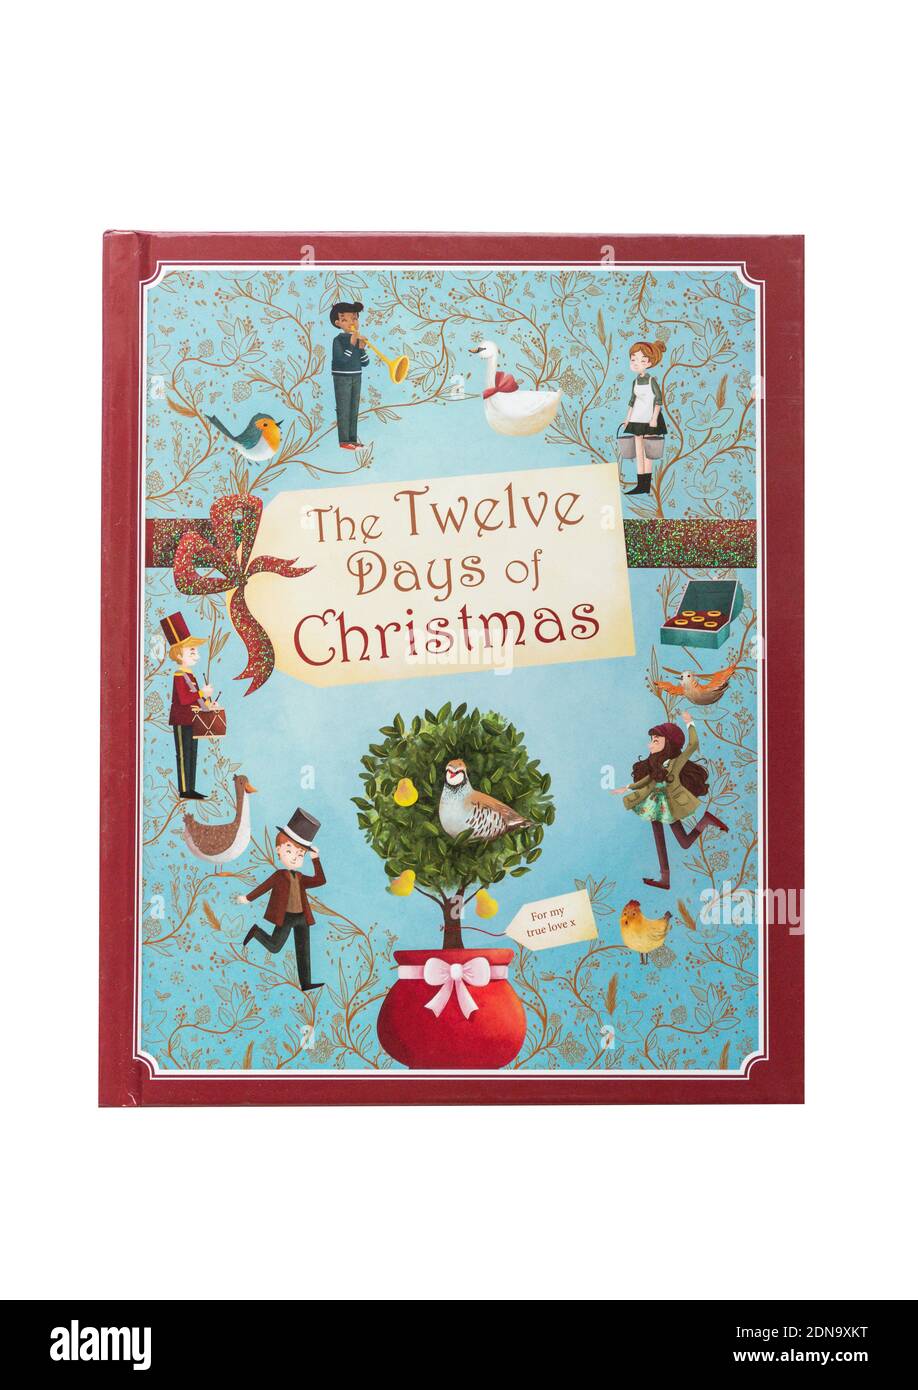 The Twelve Days of Christmas picture book, Greater London, England, United Kingdom Stock Photo